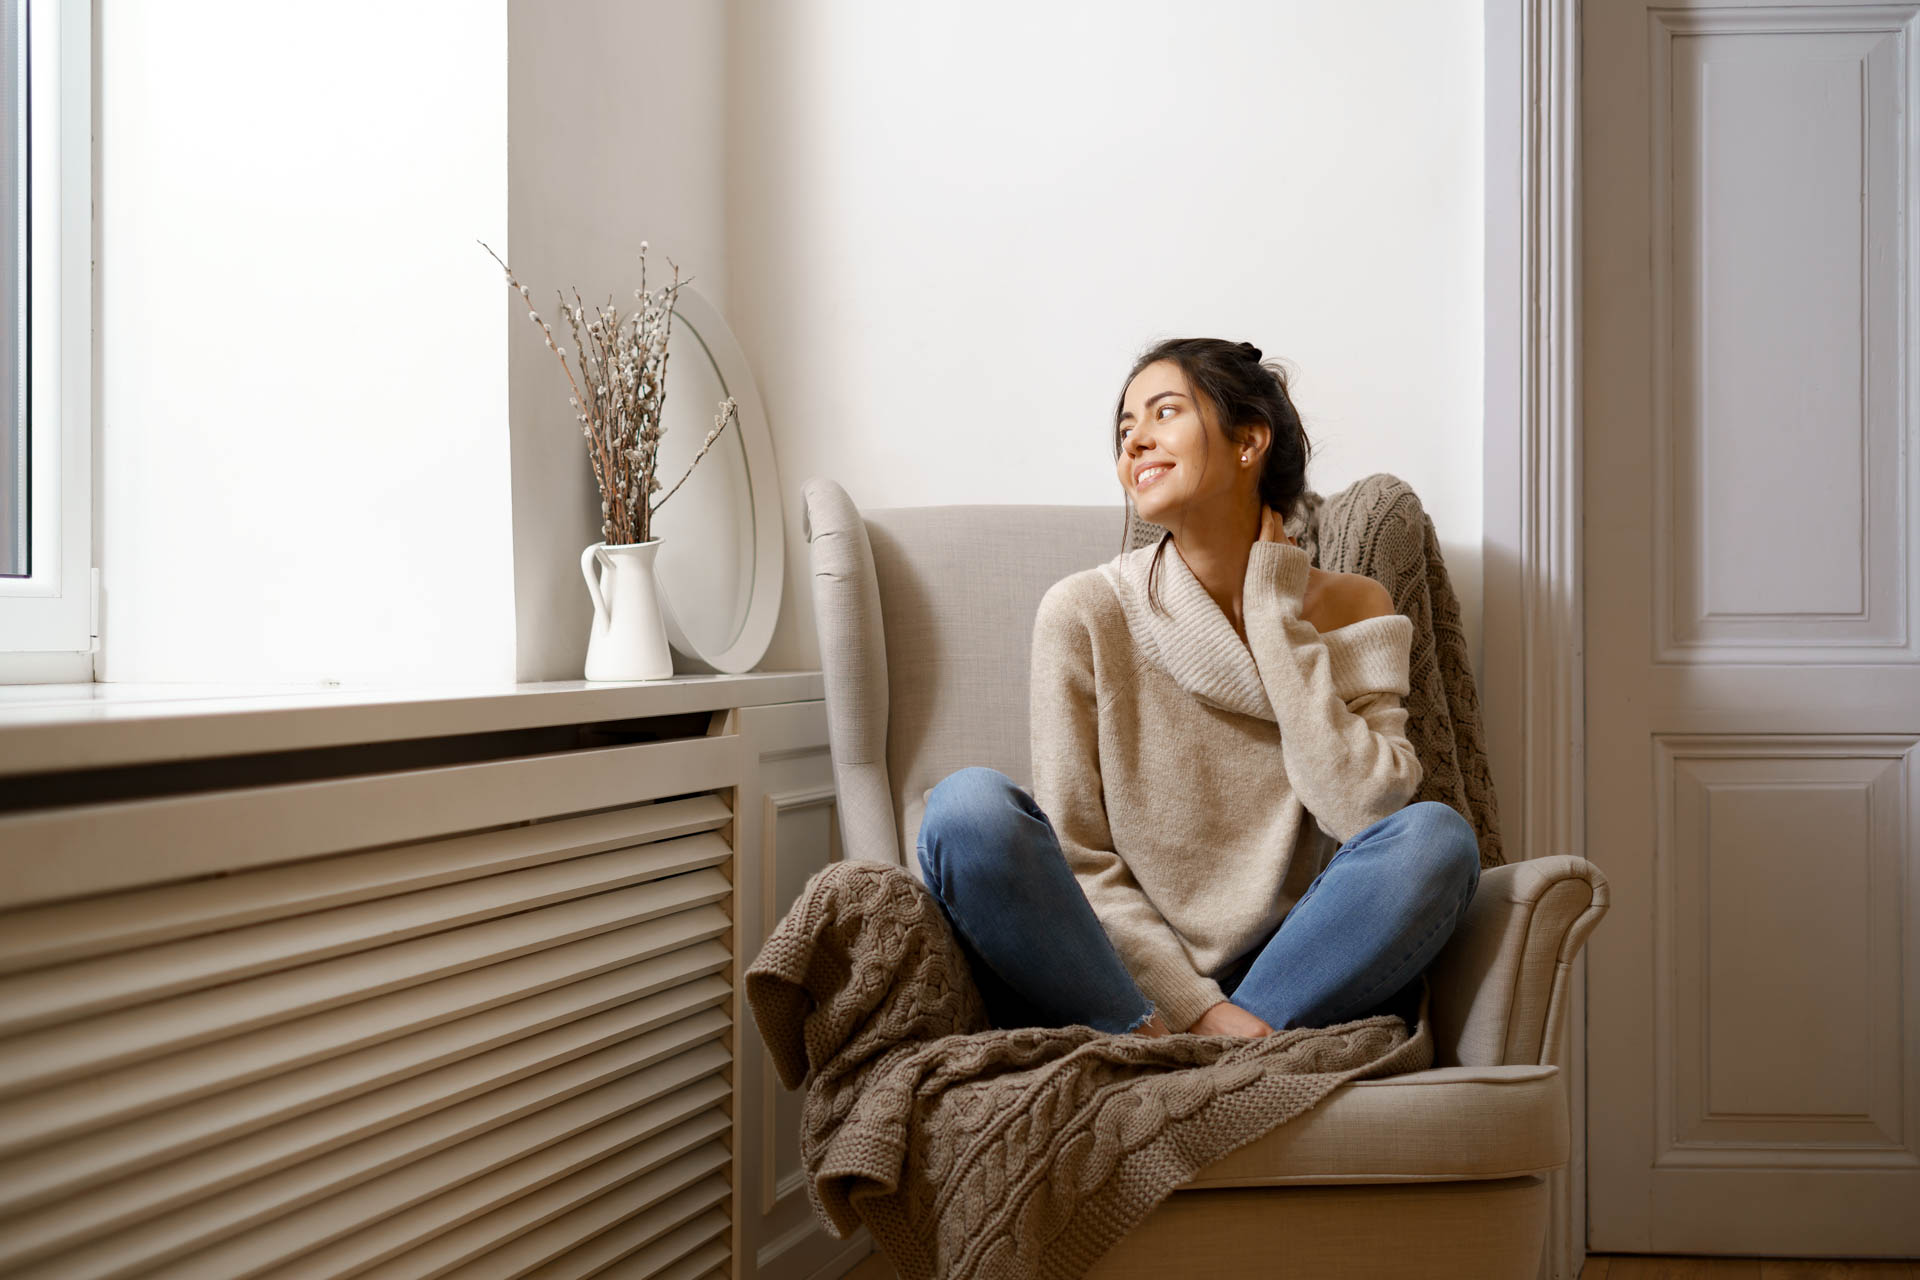 A woman in a cozy sweater sits relaxed in an armchair by a window, smiling and looking away, with a vase of branches and a book on heating and cooling nearby.